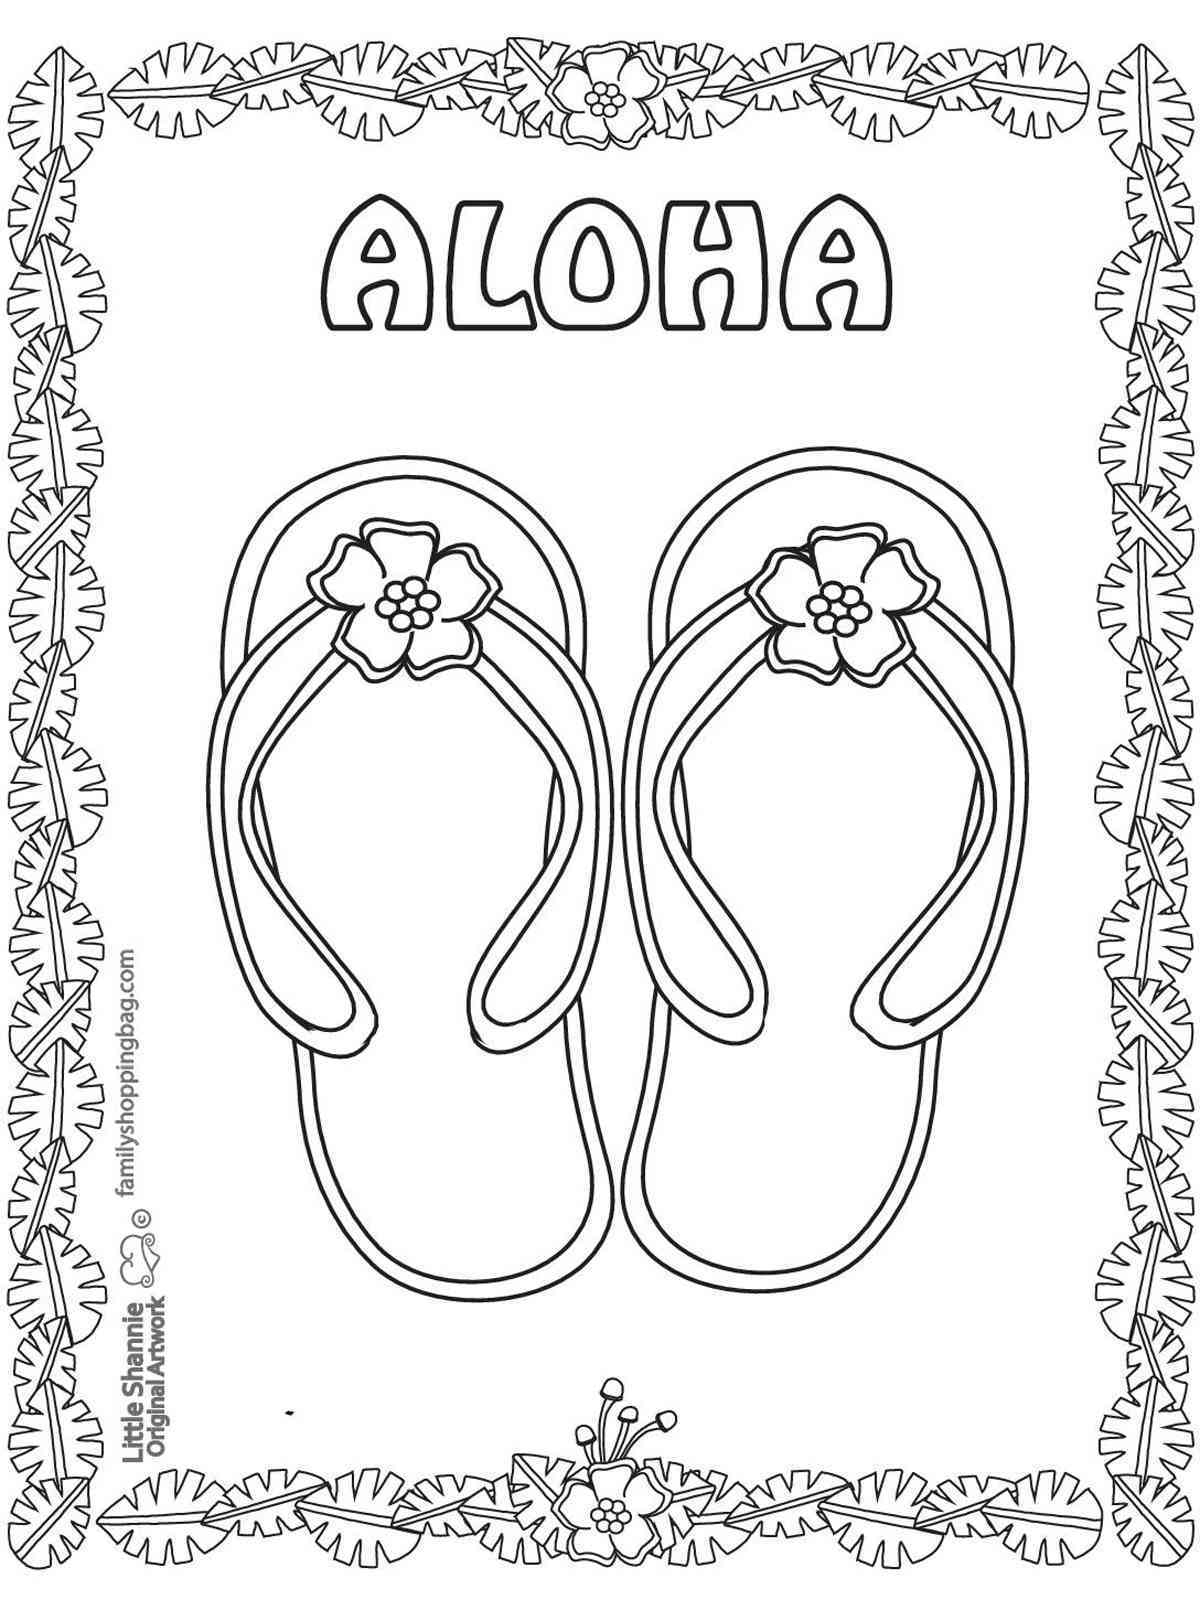 Aloha! coloring pages